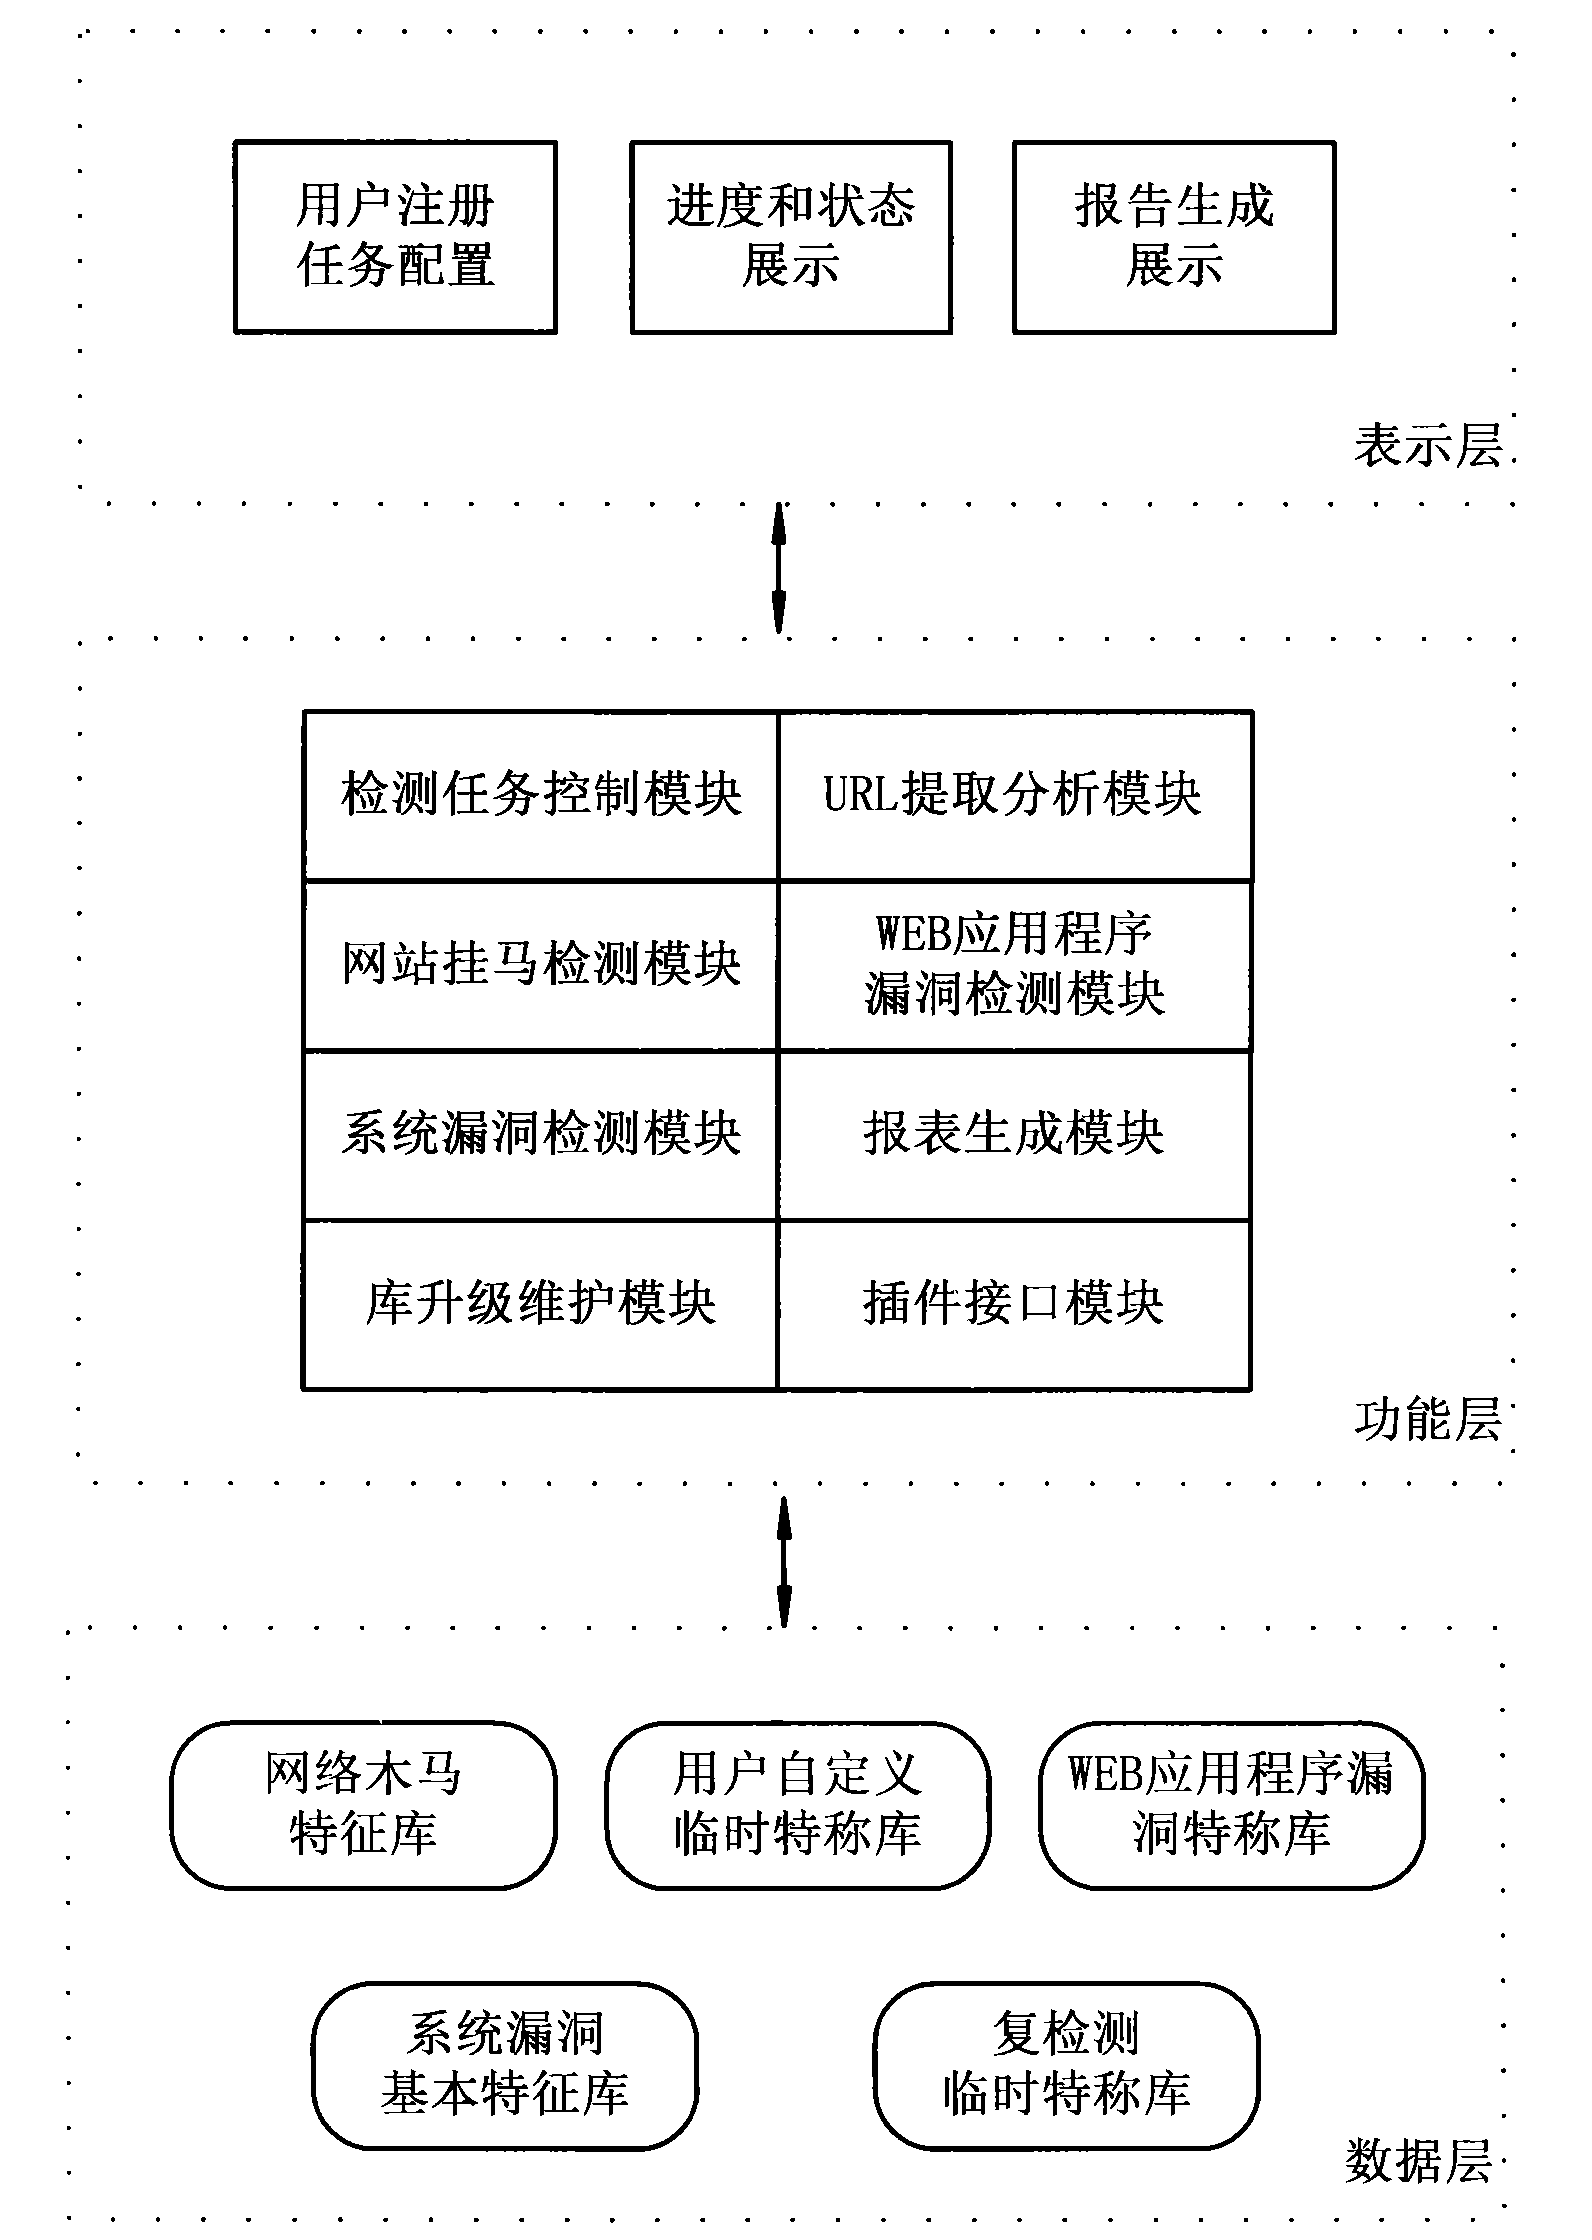 System and method for automatically detecting WEB security